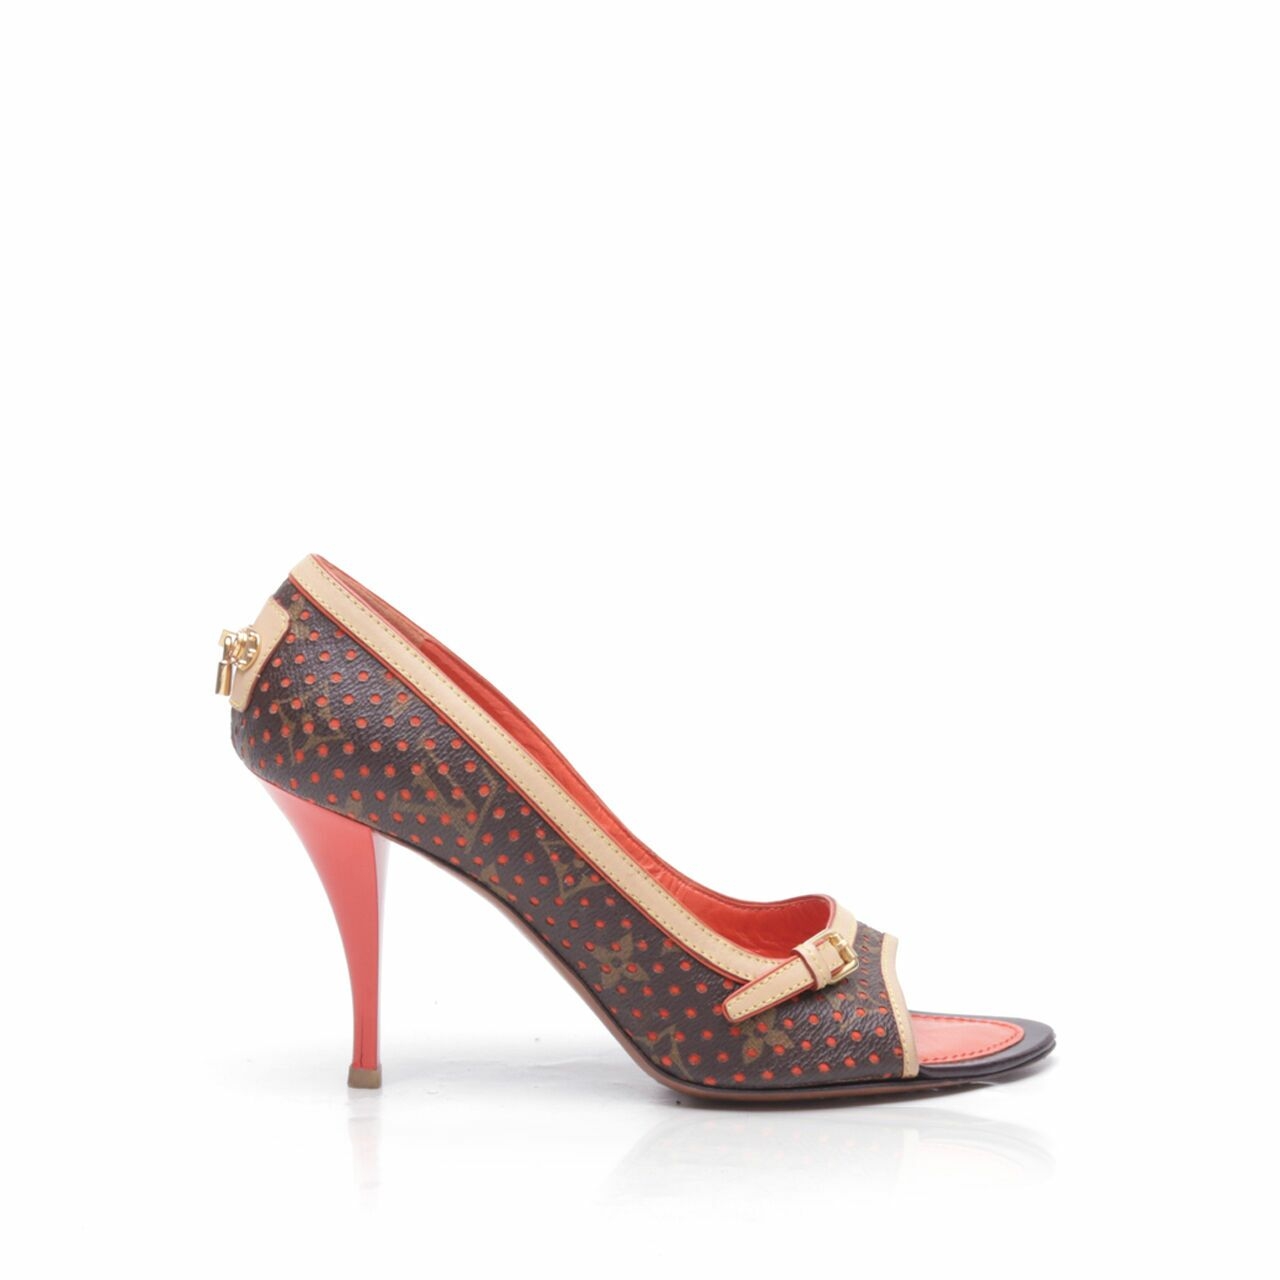 Louis Vuitton Limited Edition Brown/Orange Monogram Perforated Open-Toe Pumps Heels